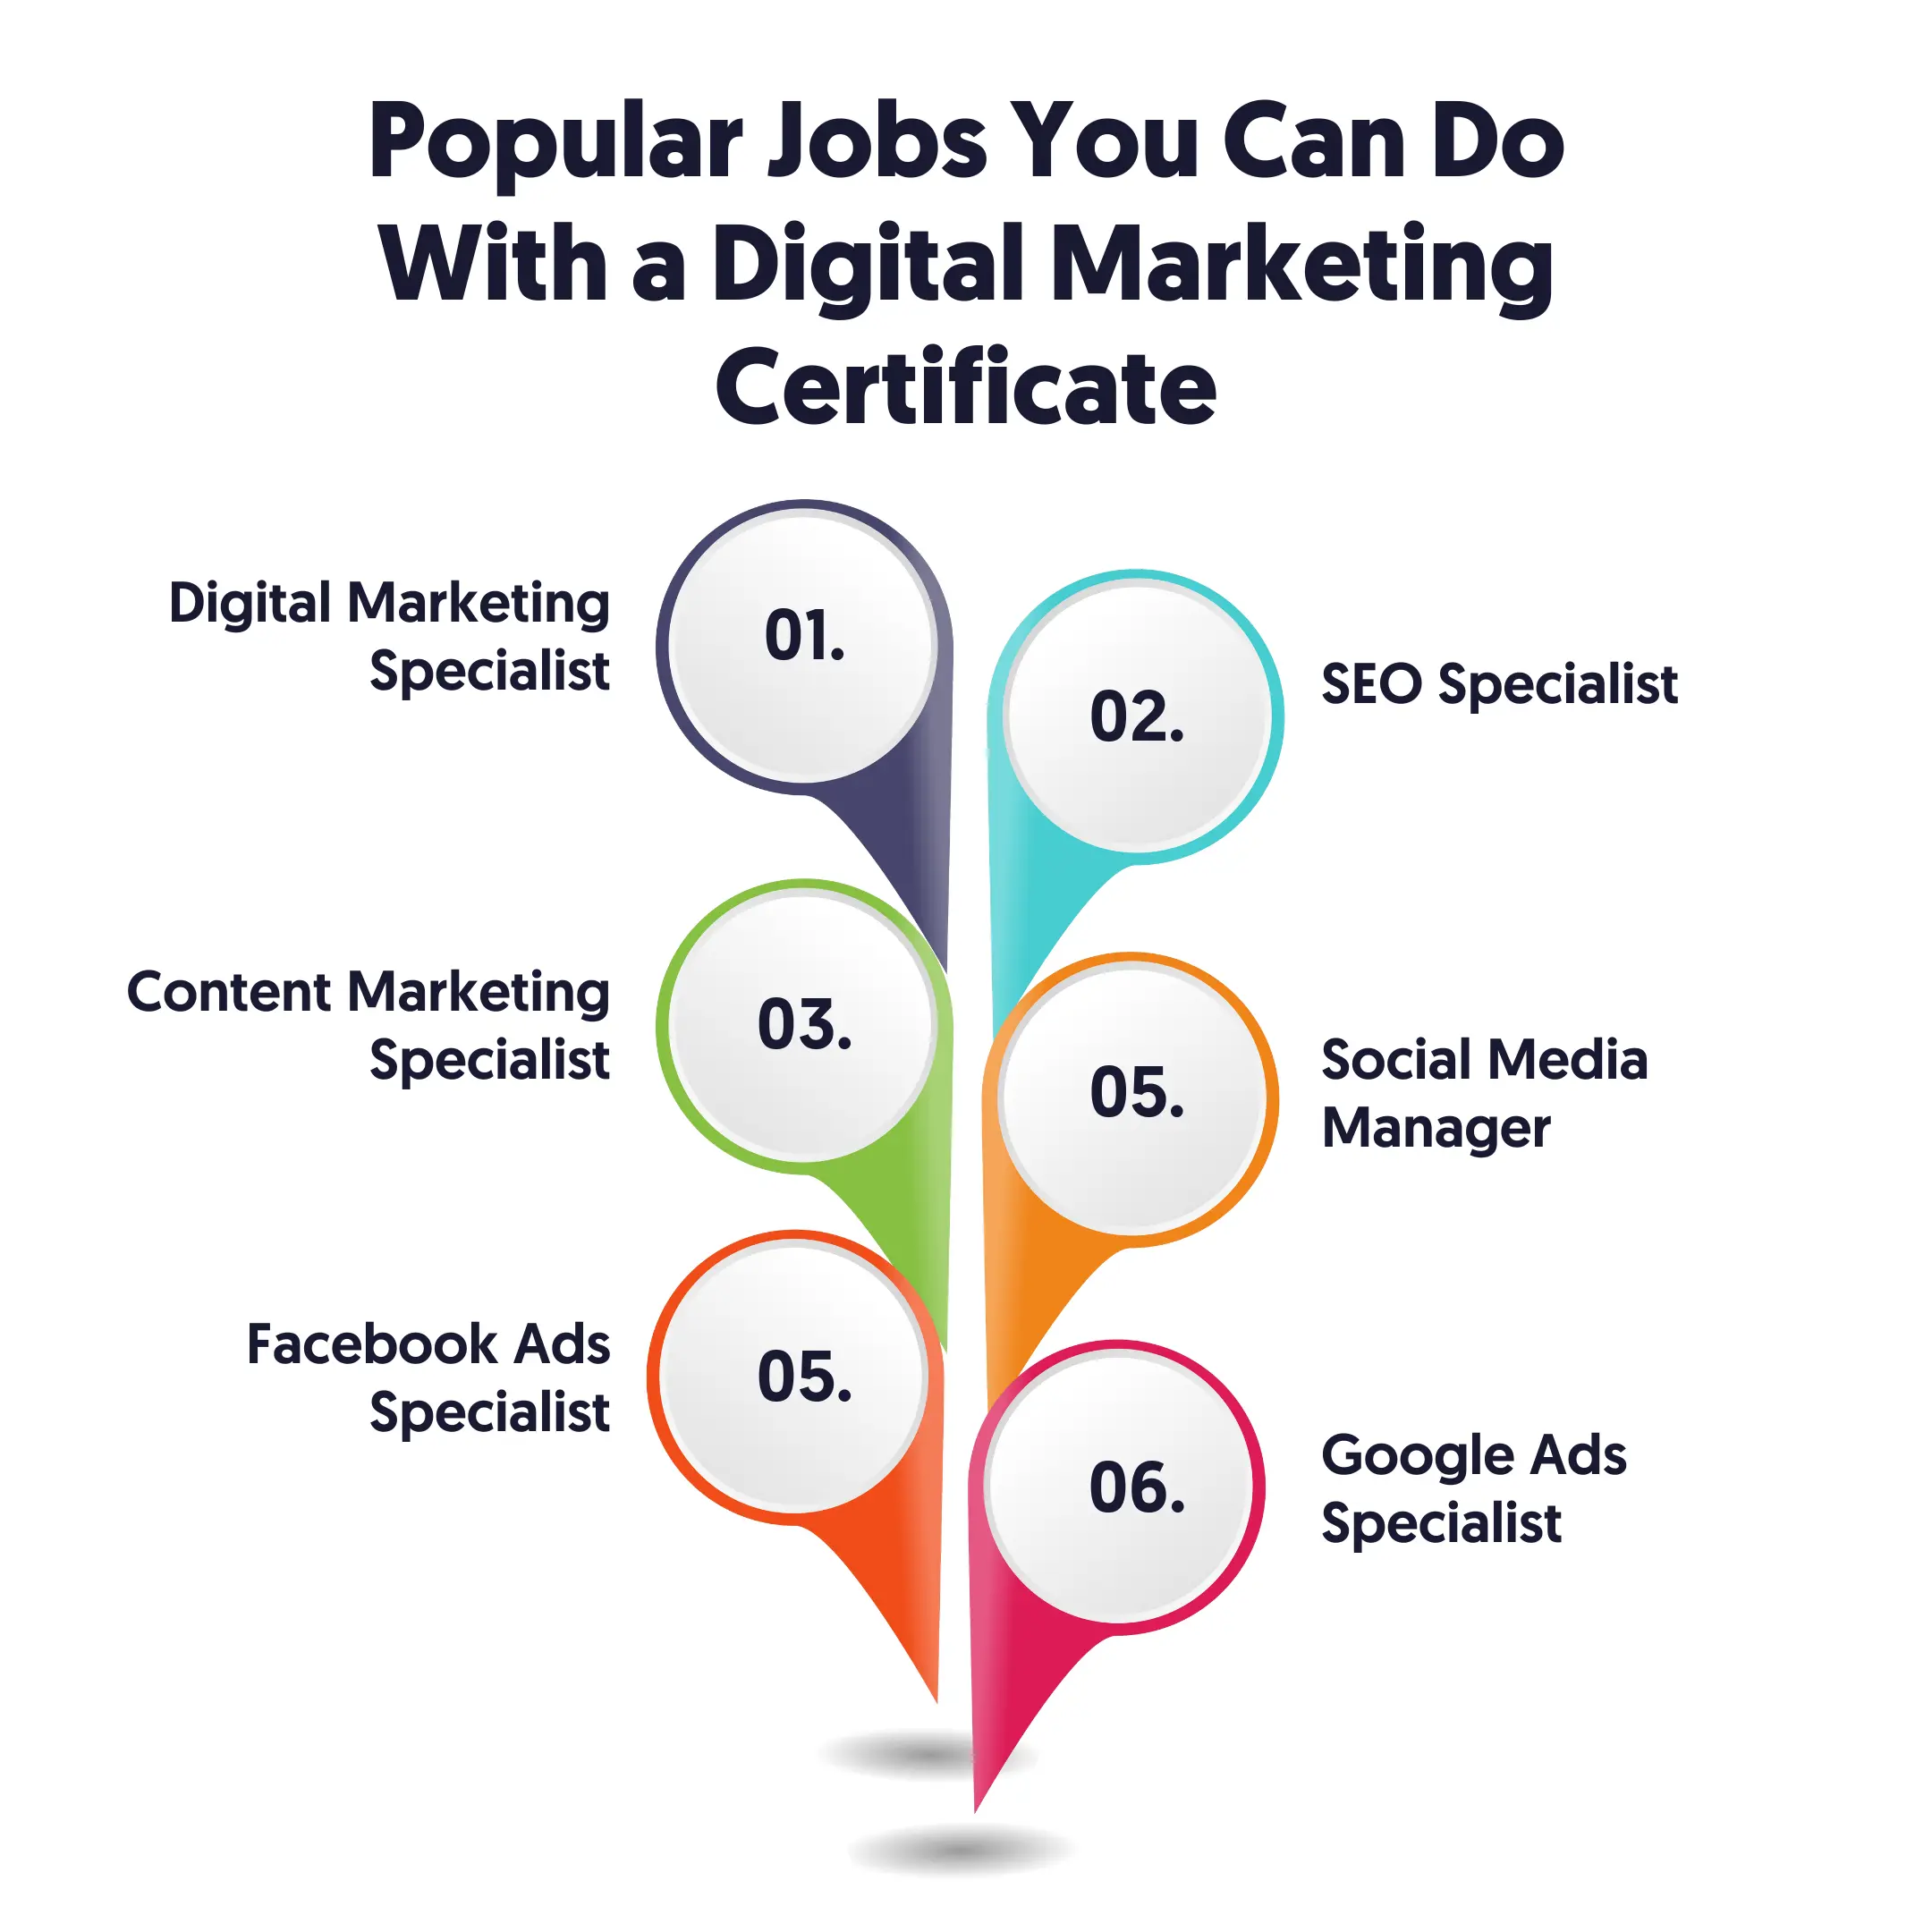 Jobs you can do with a digital marketing certificate.